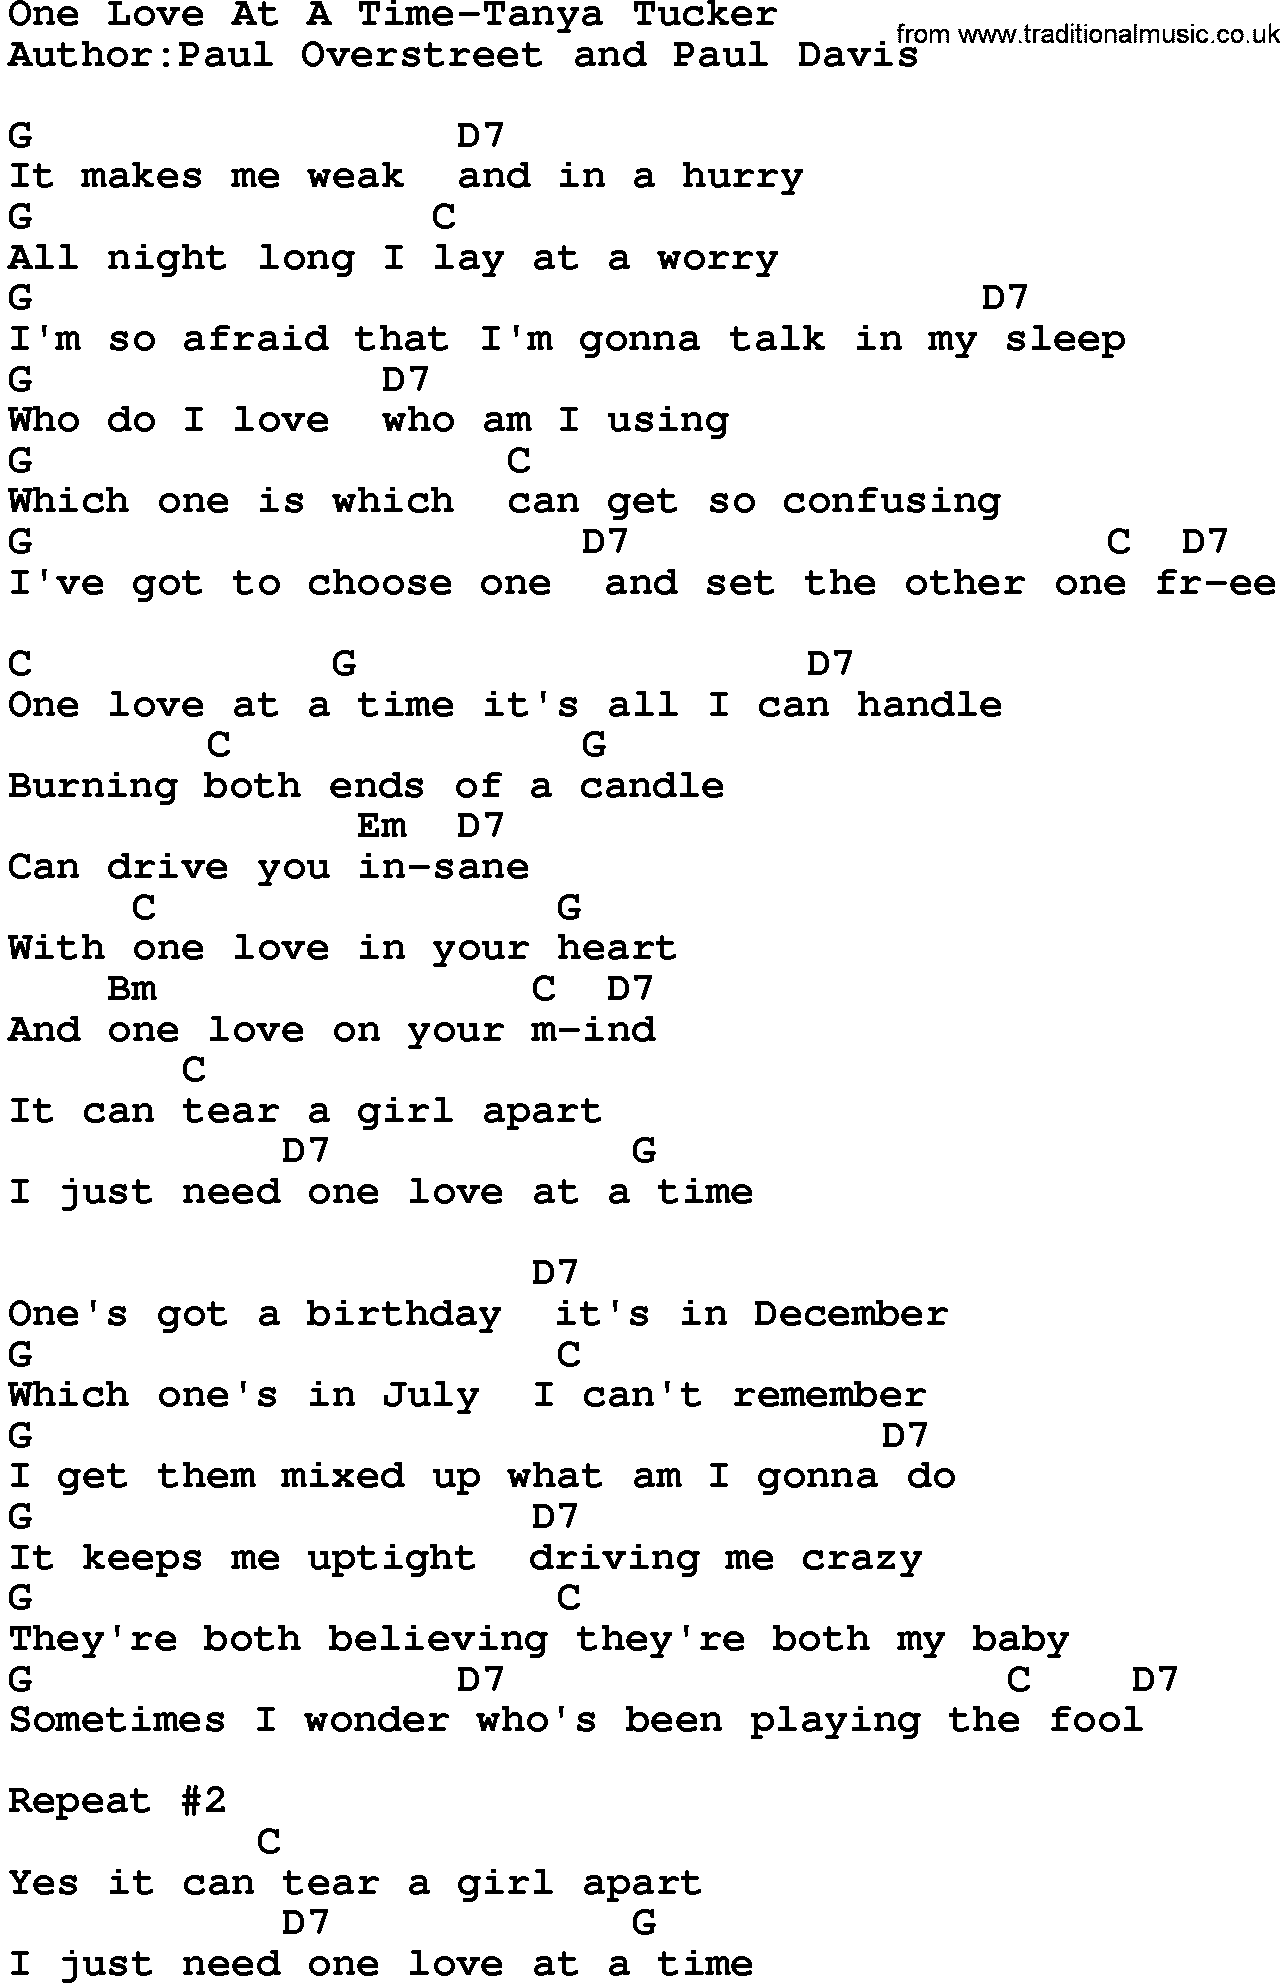 Country music song: One Love At A Time-Tanya Tucker lyrics and chords